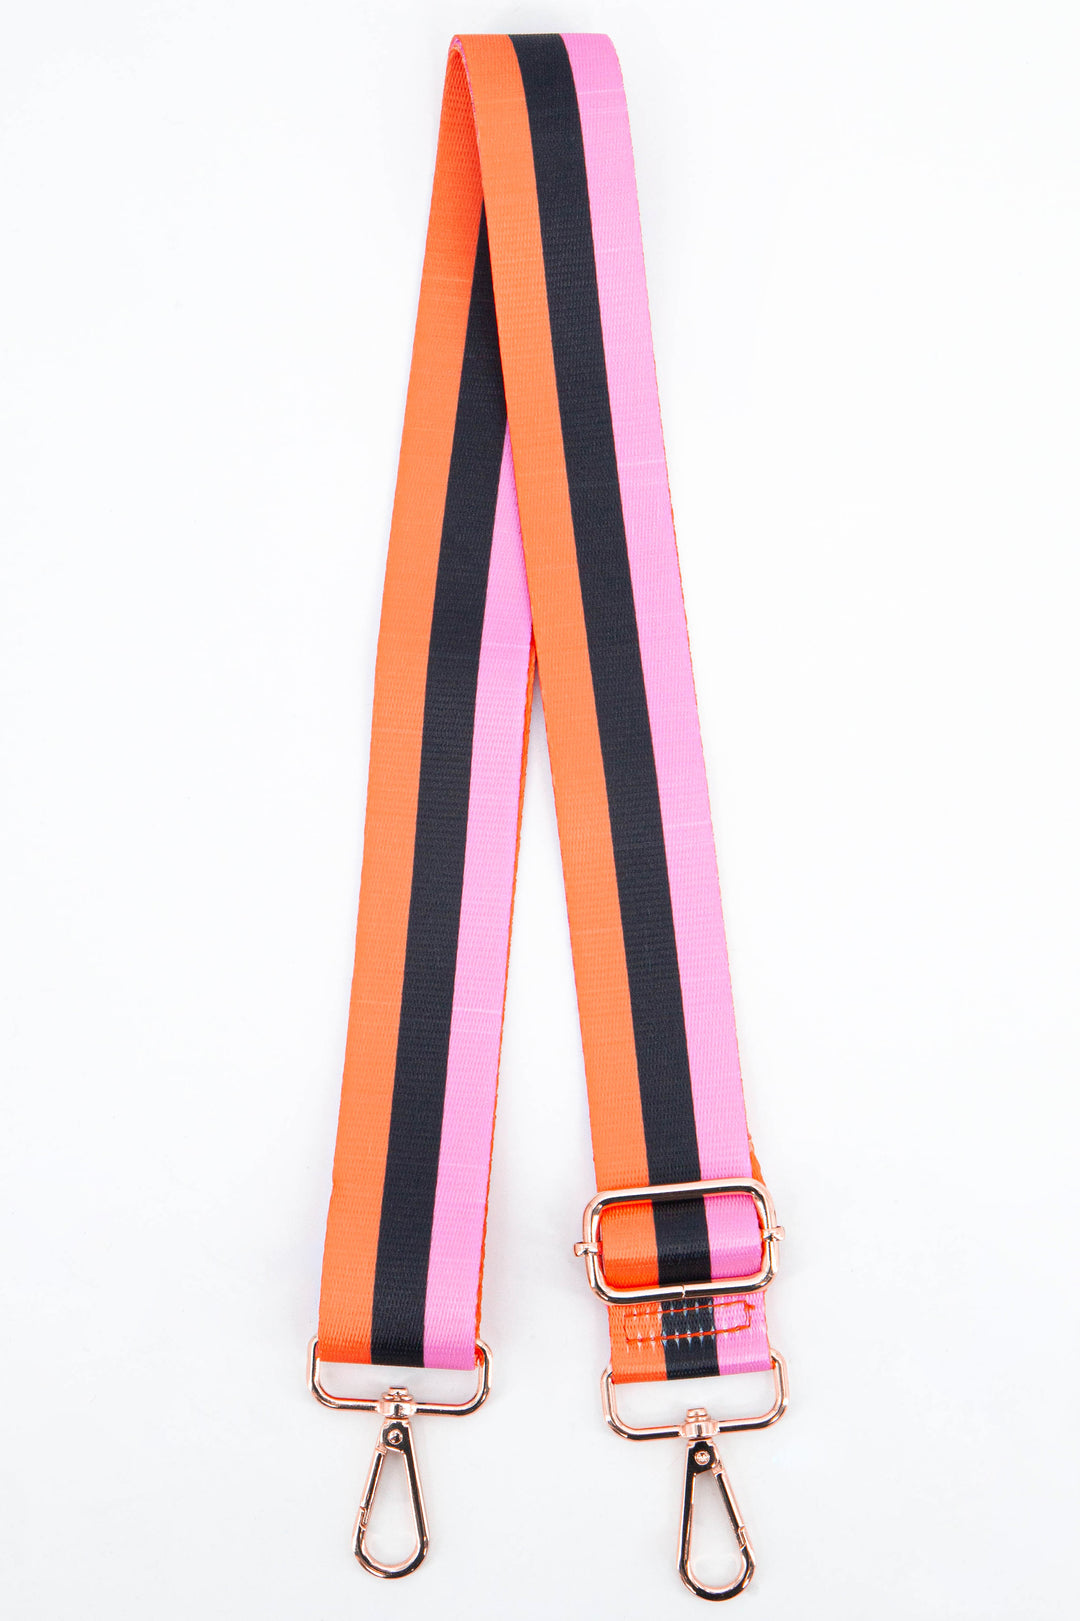 clip on bag strap with a pattern of three colour block stripes in pink, black and orange 